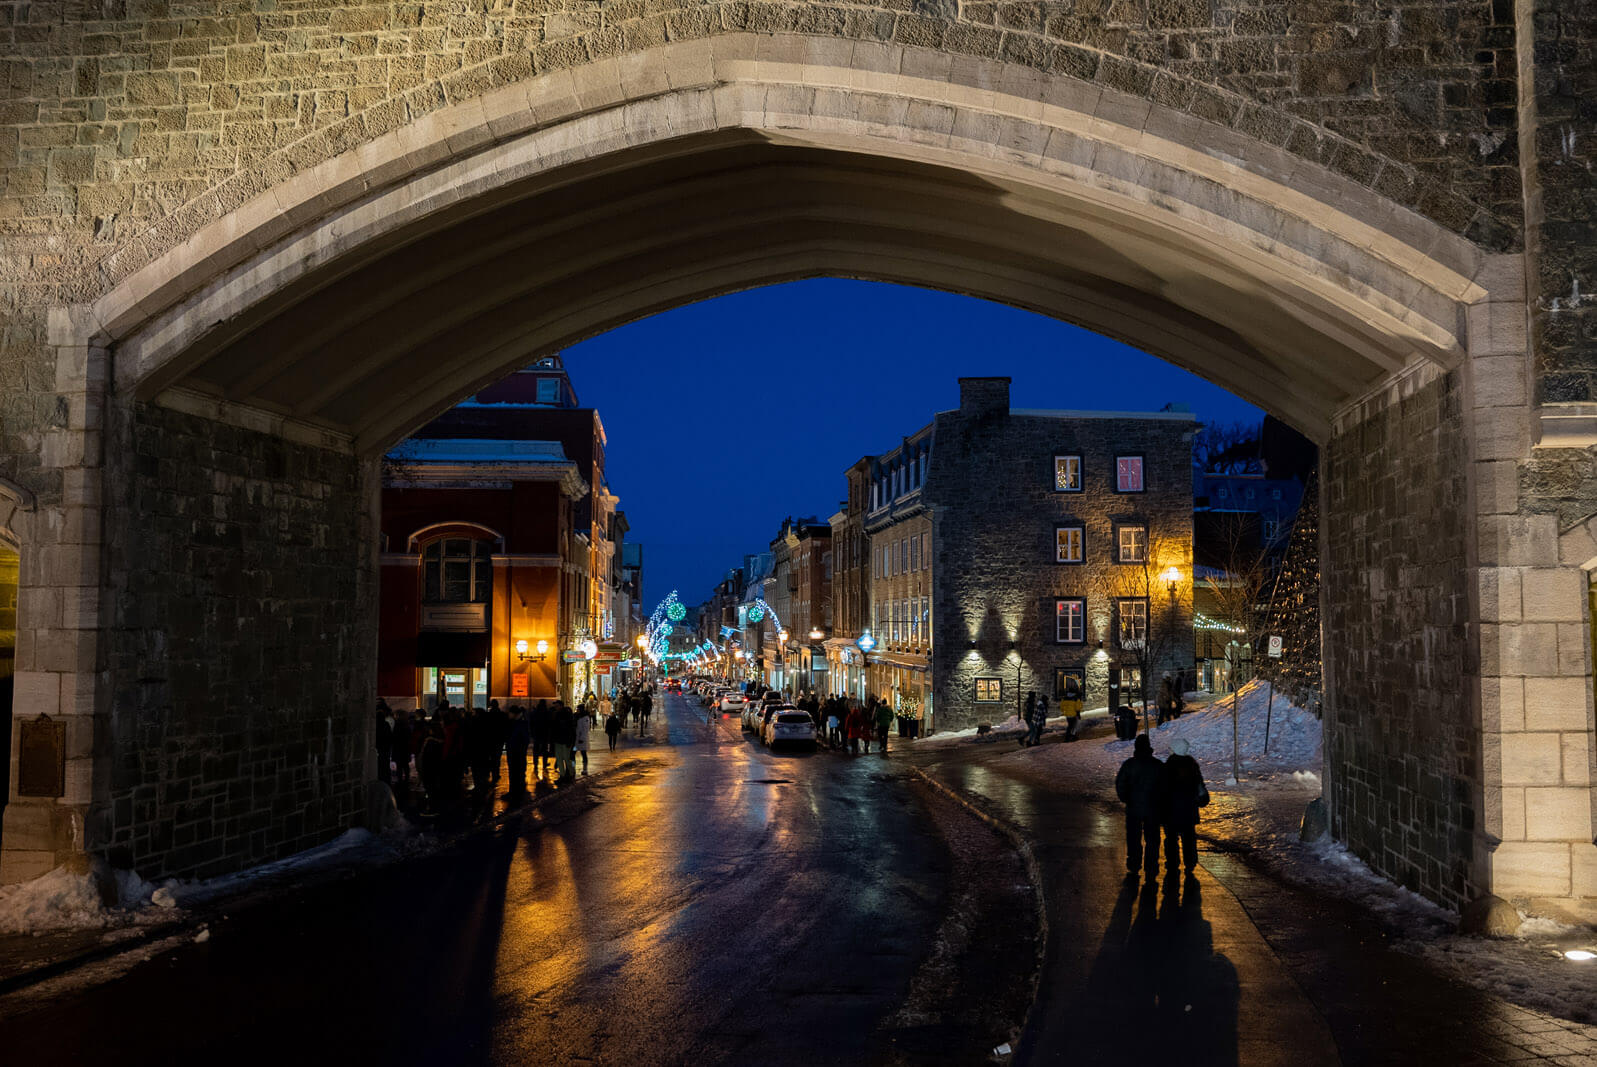 fortification gate to Old Quebec City in Canada at night